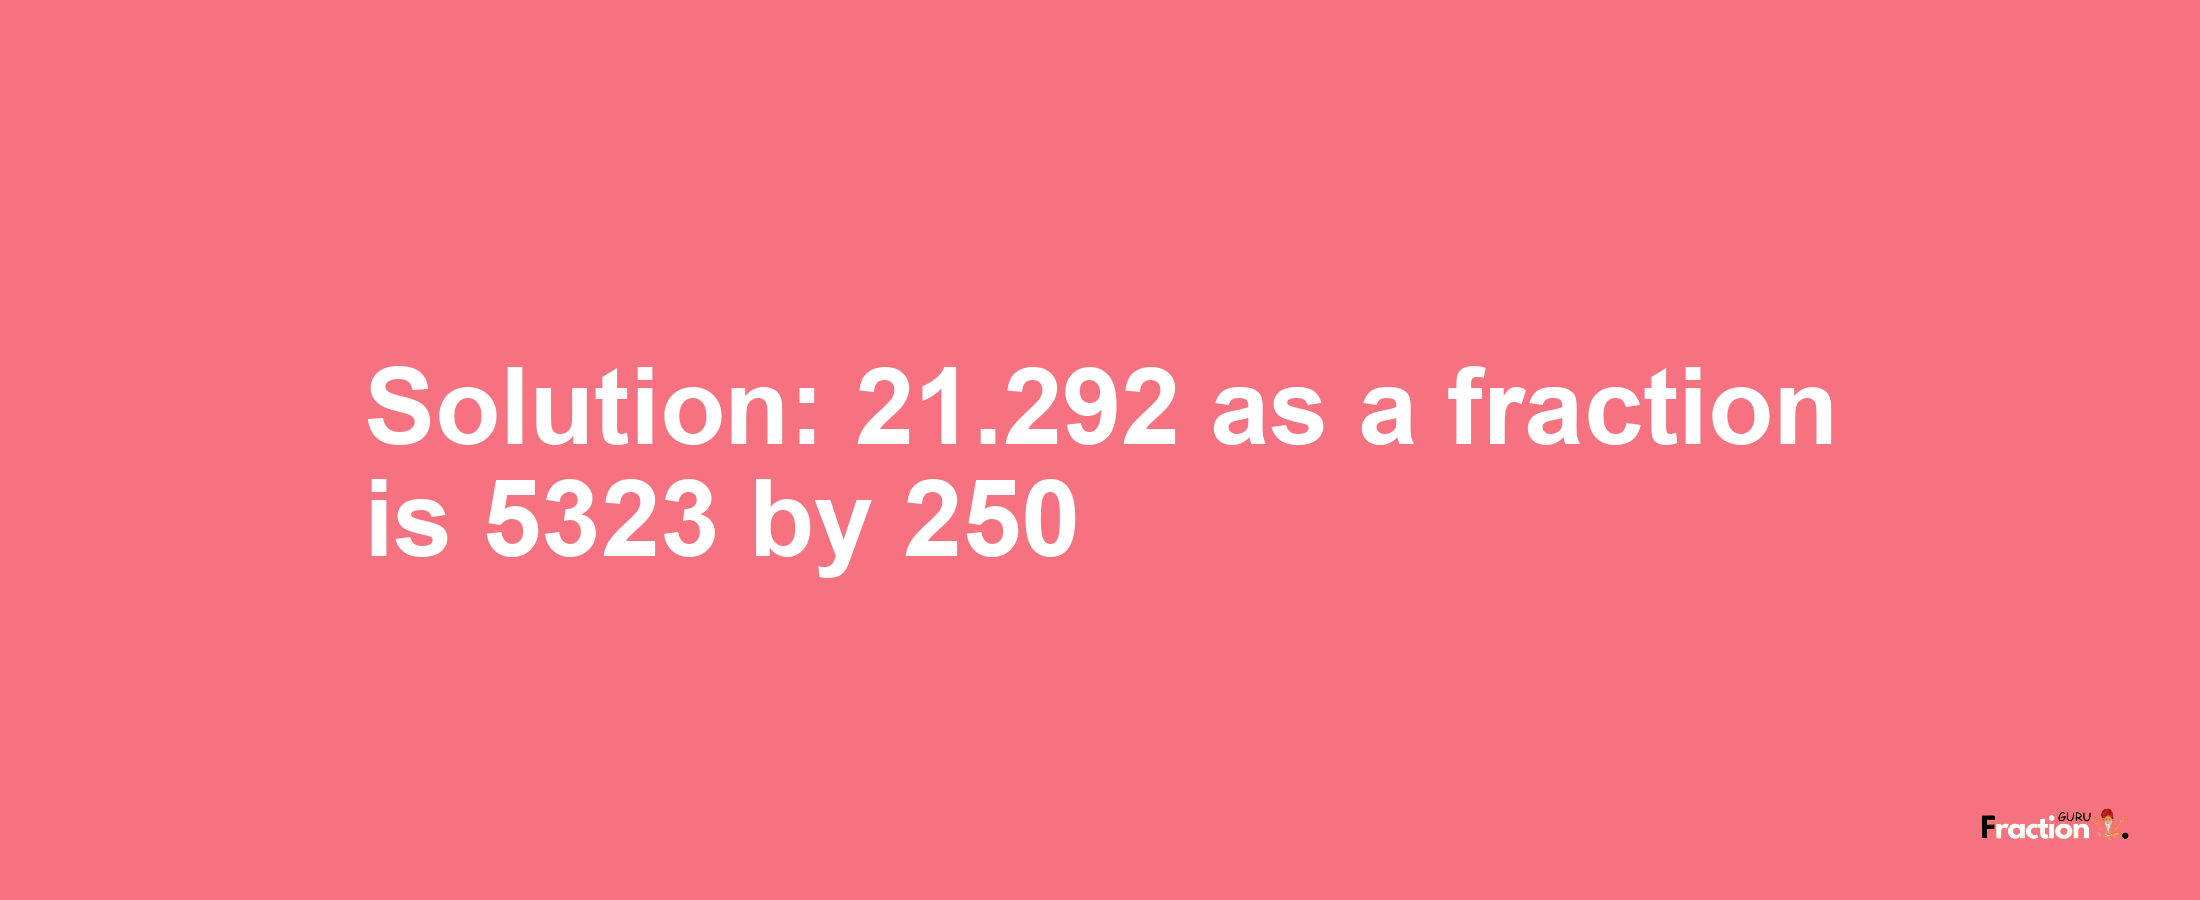 Solution:21.292 as a fraction is 5323/250